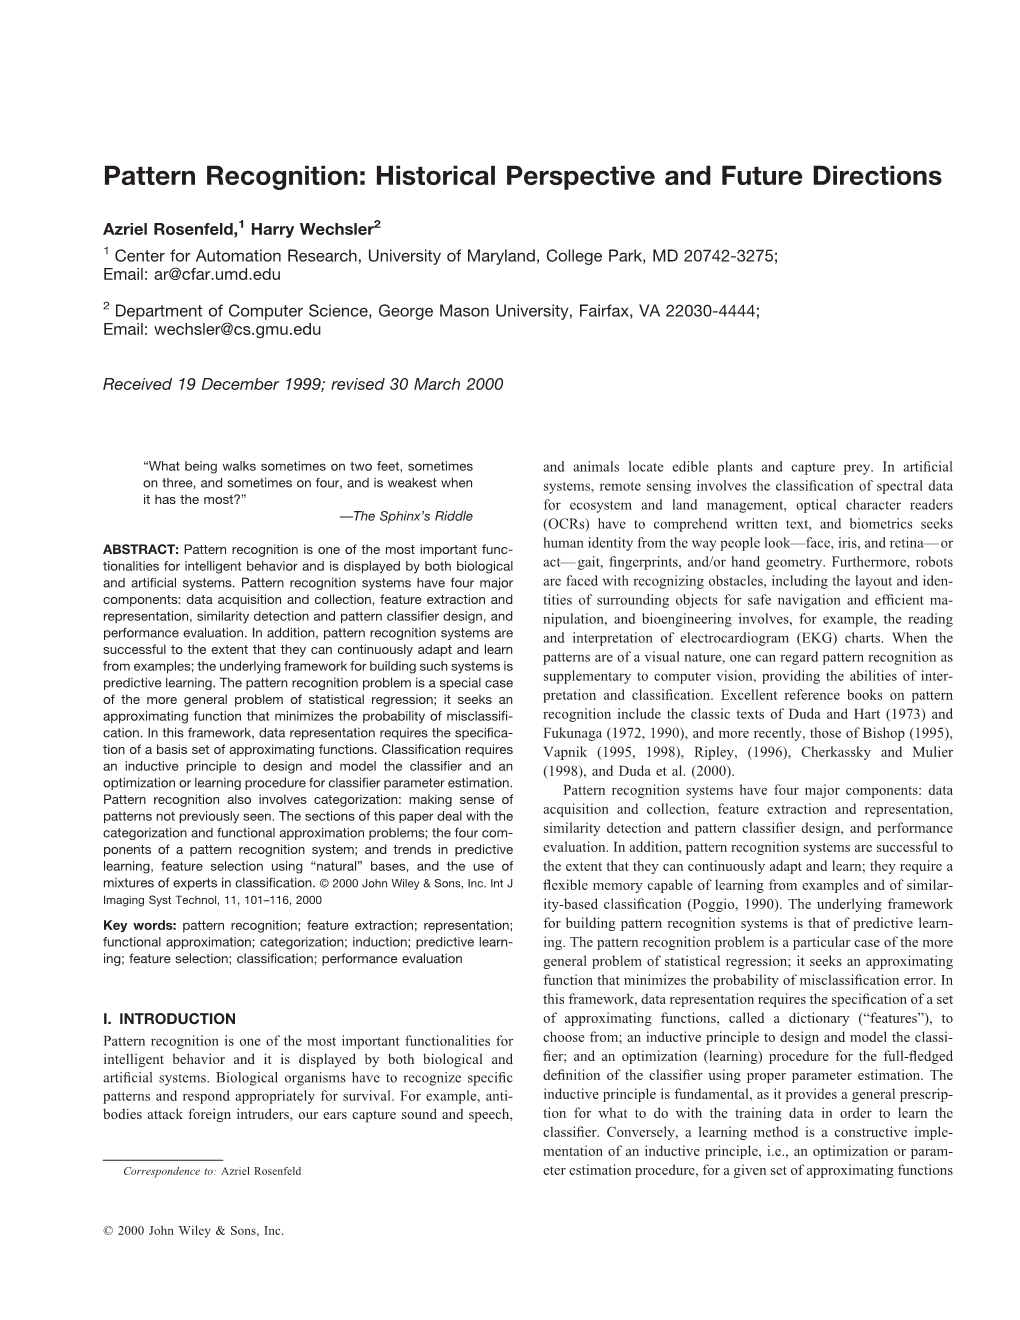 Pattern Recognition: Historical Perspective and Future Directions